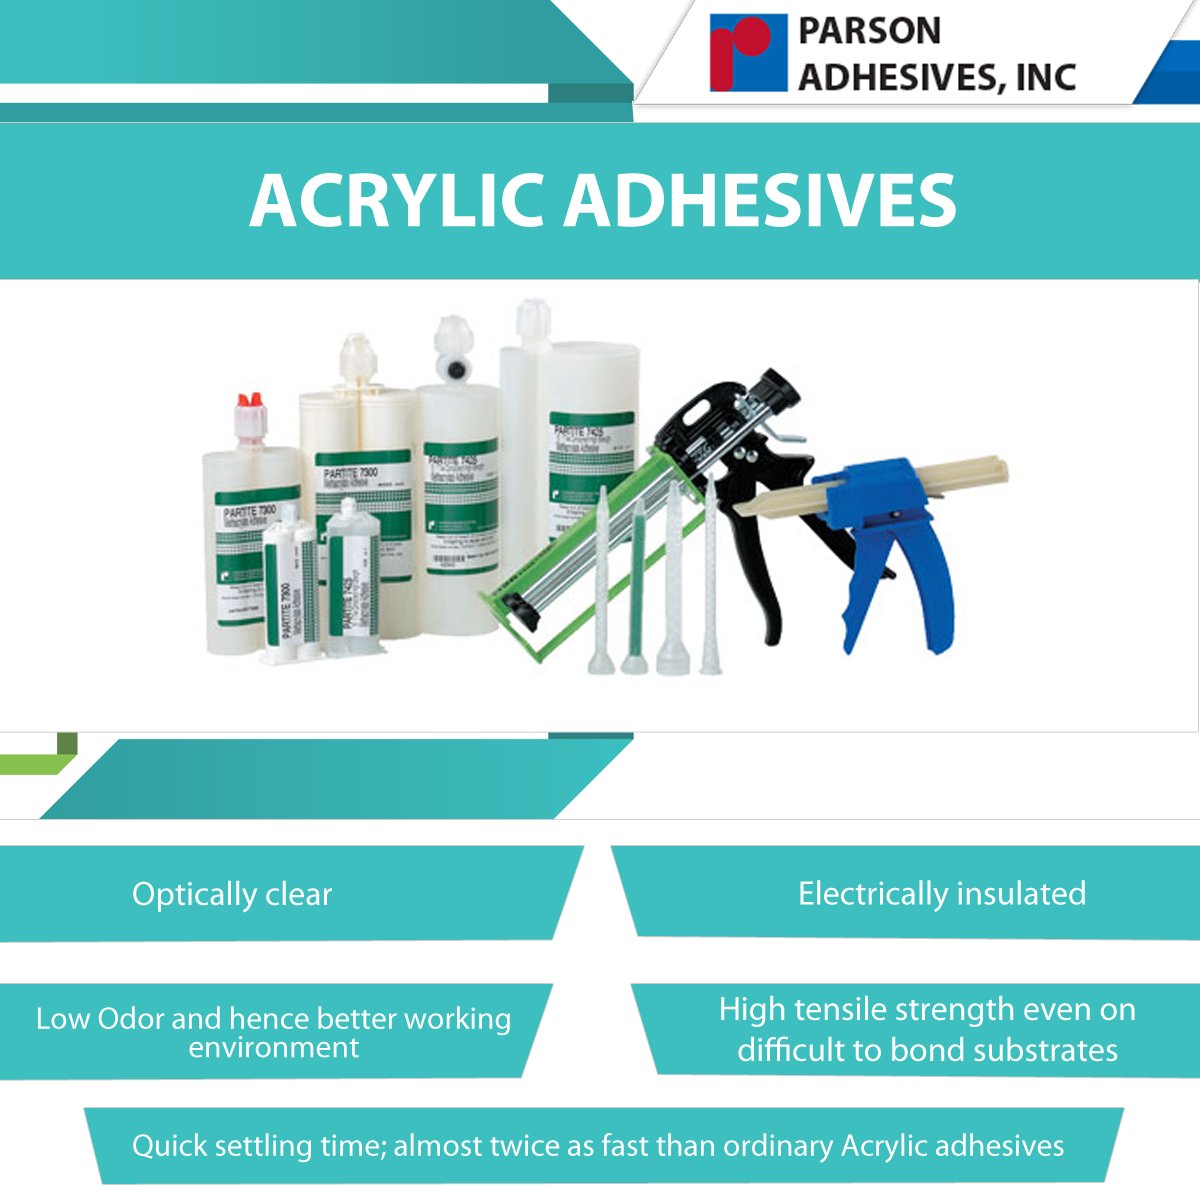 Acrylic Adhesives are well-known for their durability and strength
You can find them here:- goo.gl/Q4HoKi
#IndustrialAdhesives #EngineeringApplications #PlasticBondingAdhesives